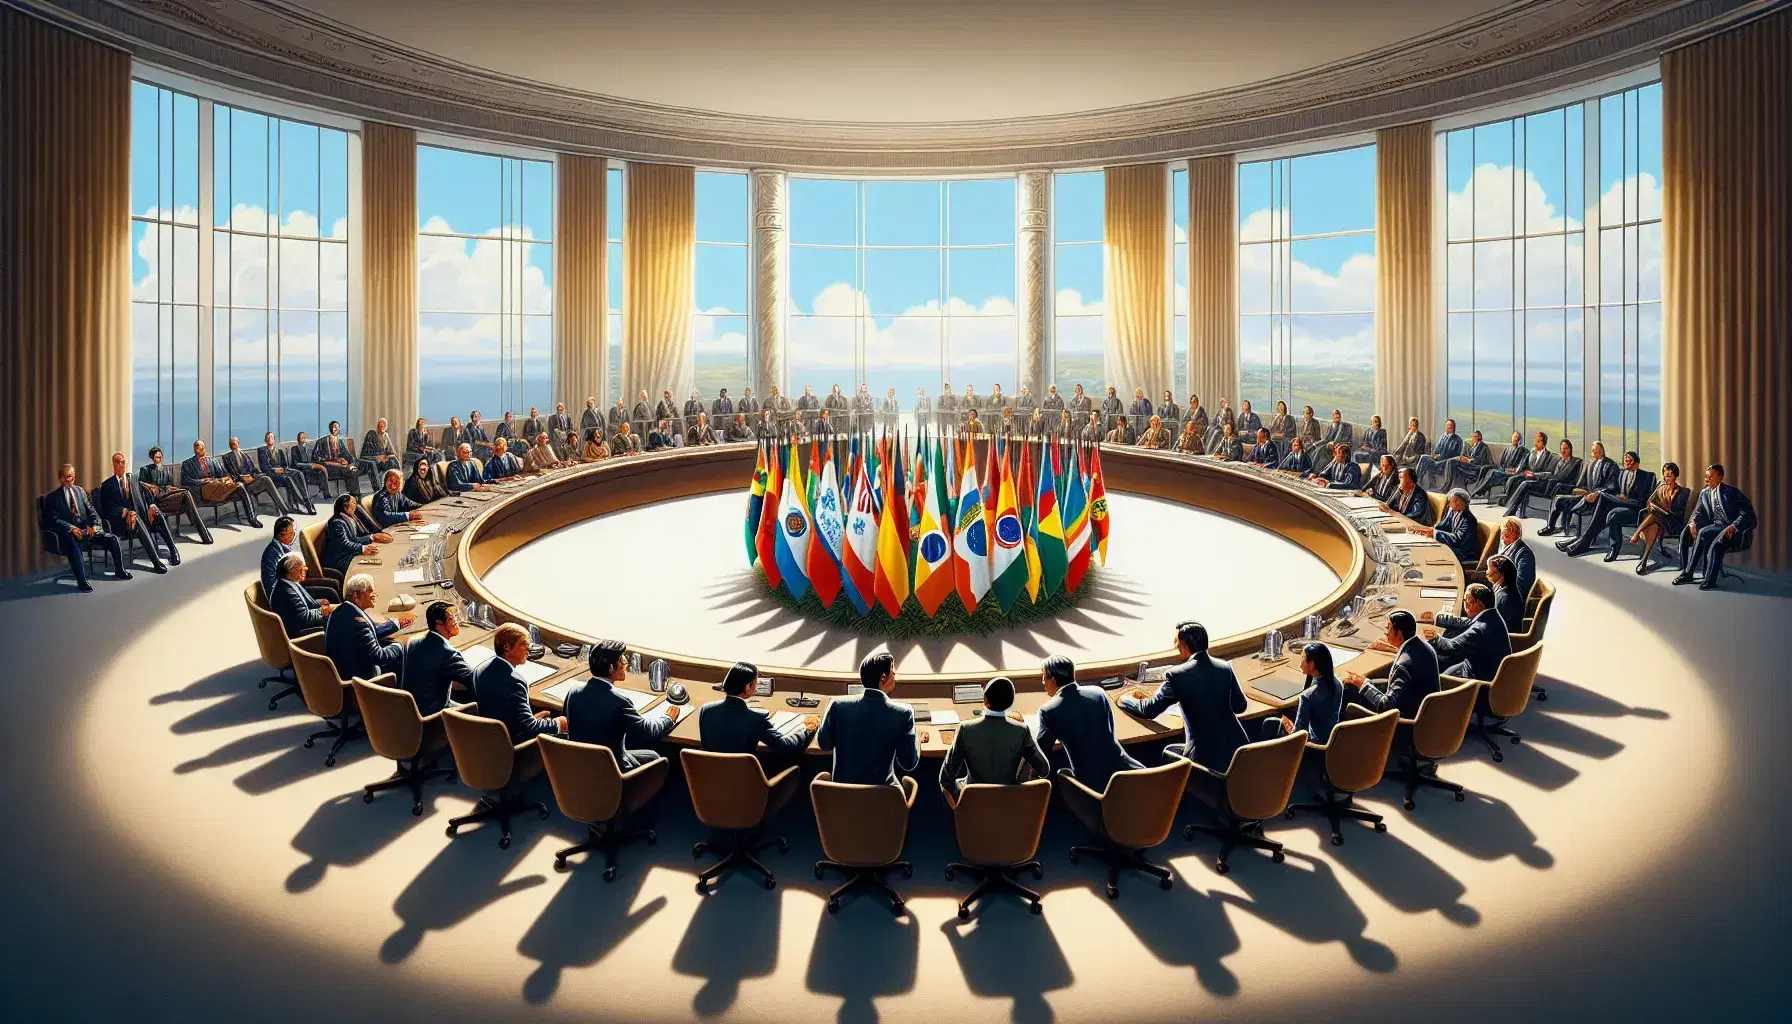 Diverse South American delegates in a conference room with a panoramic window, engaged in discussion around a table adorned with colorful, emblem-free flags.